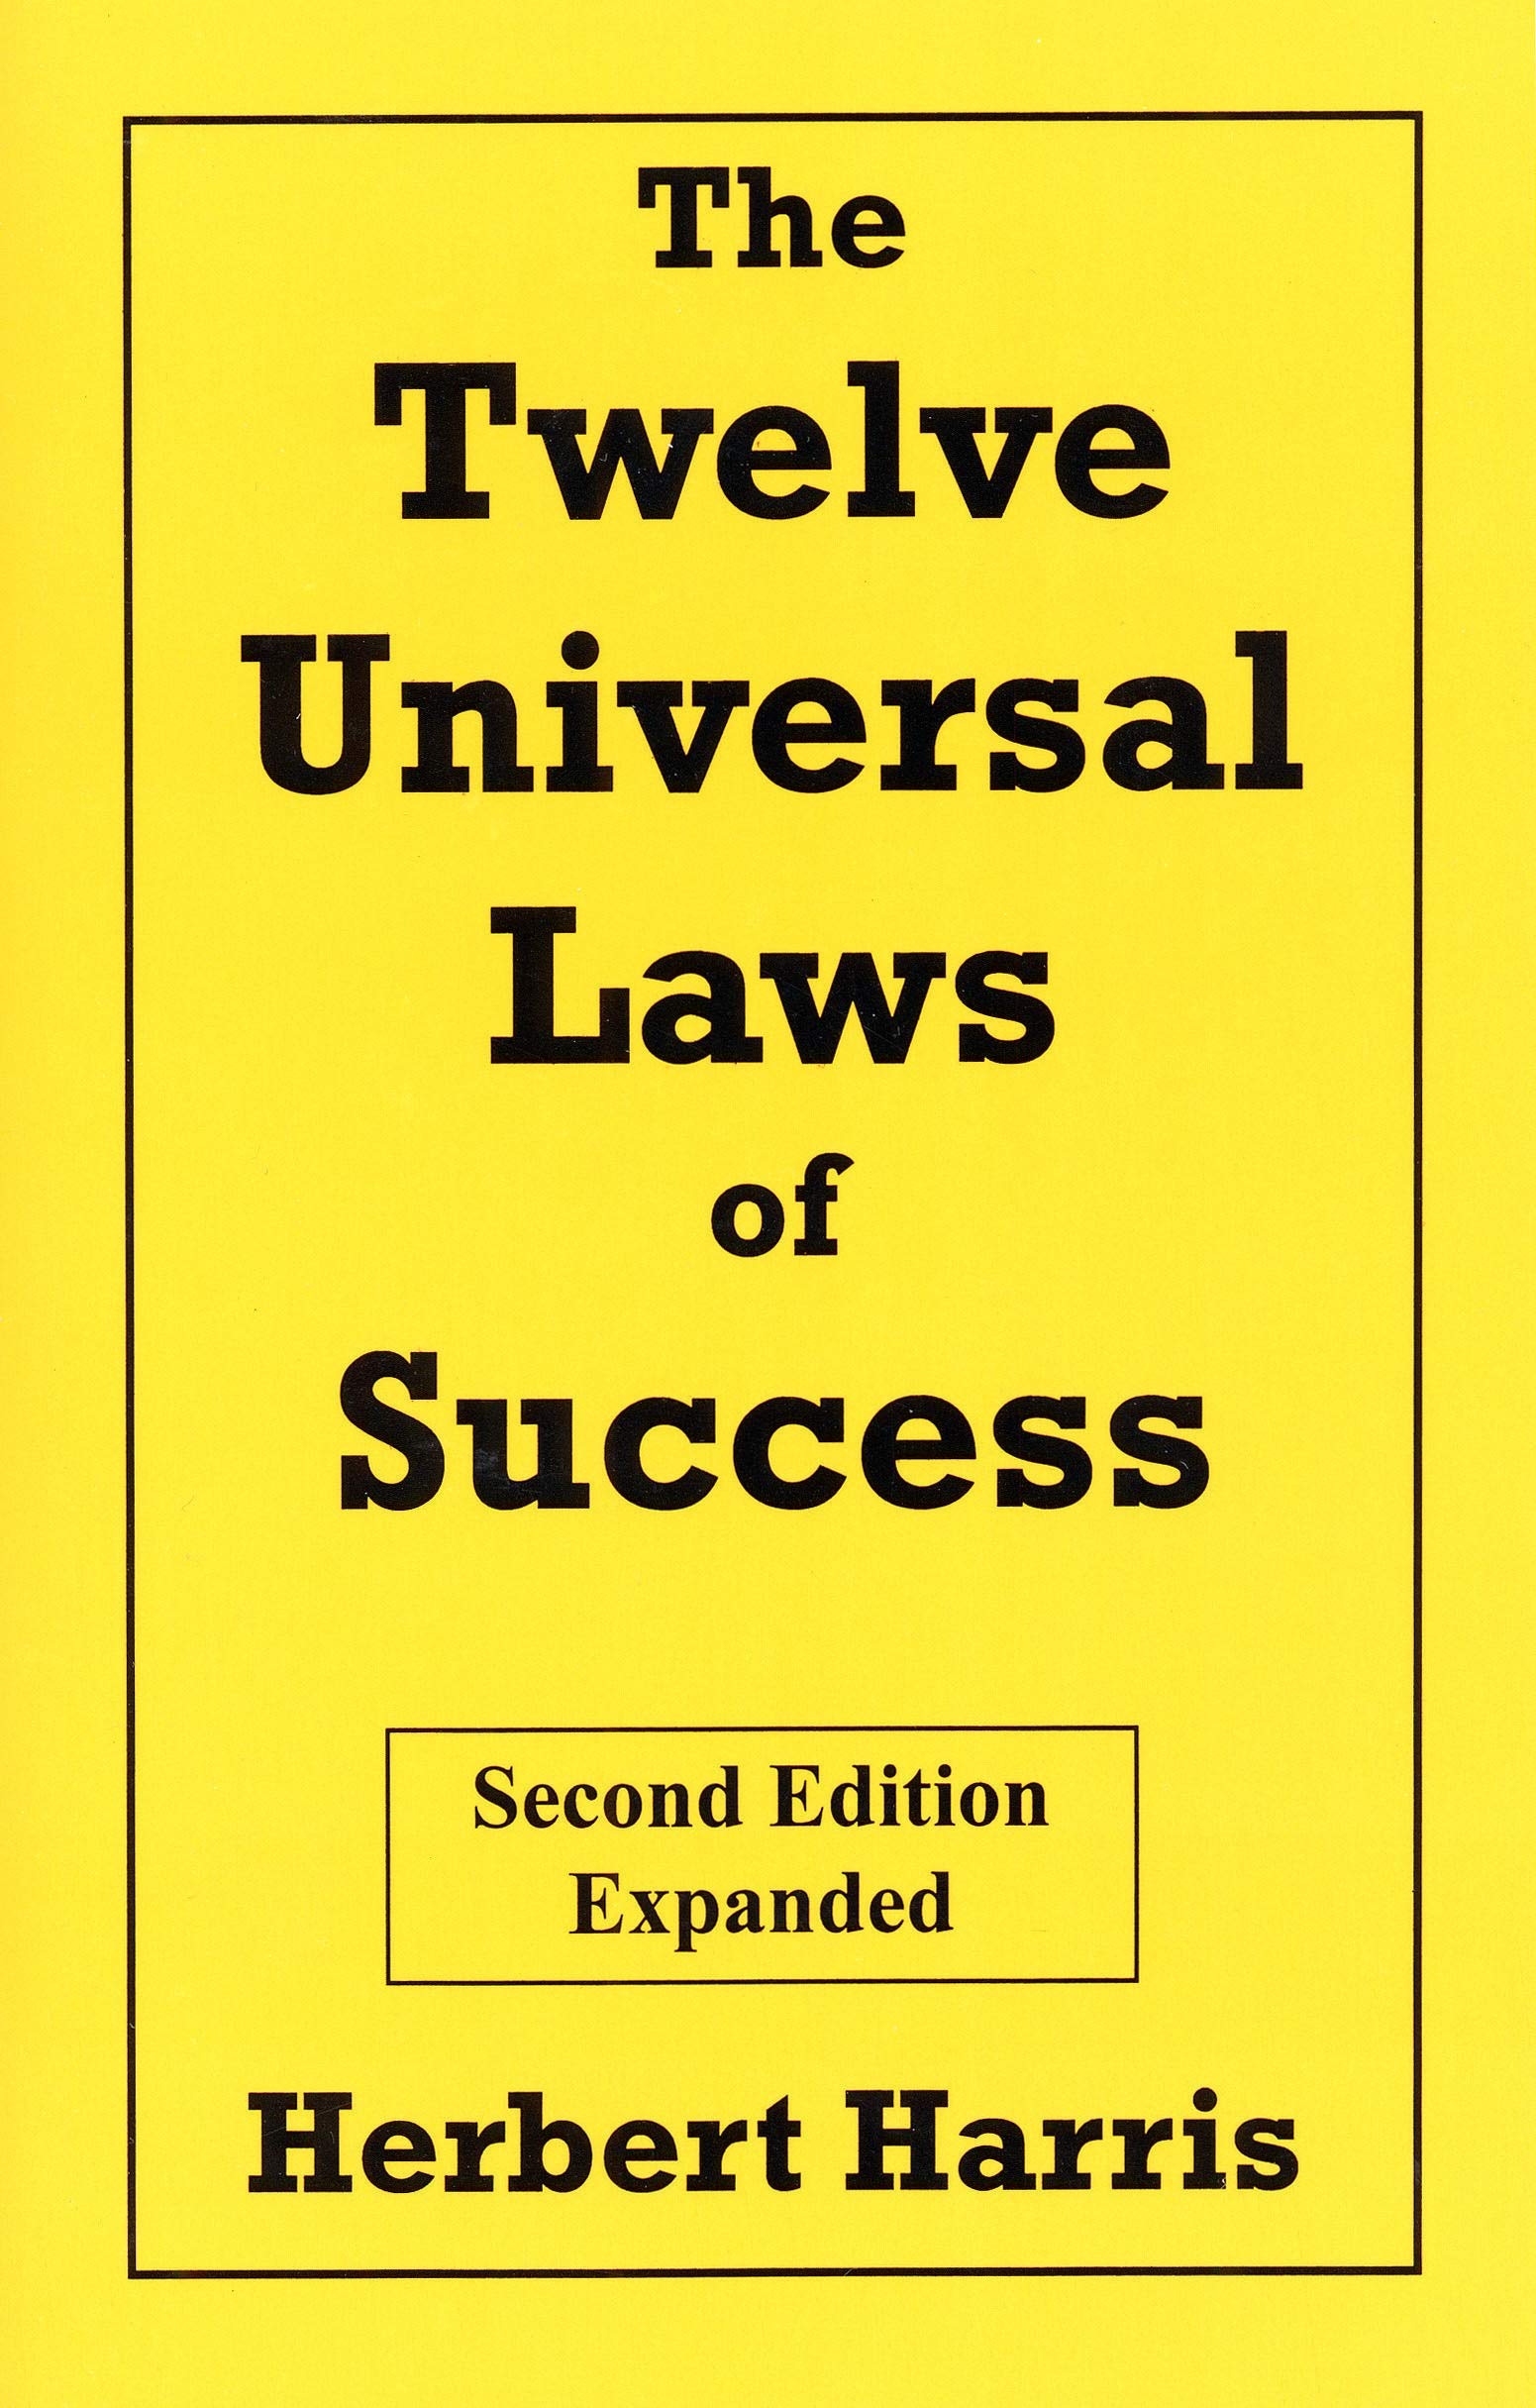 12 universal laws of success pdf free download